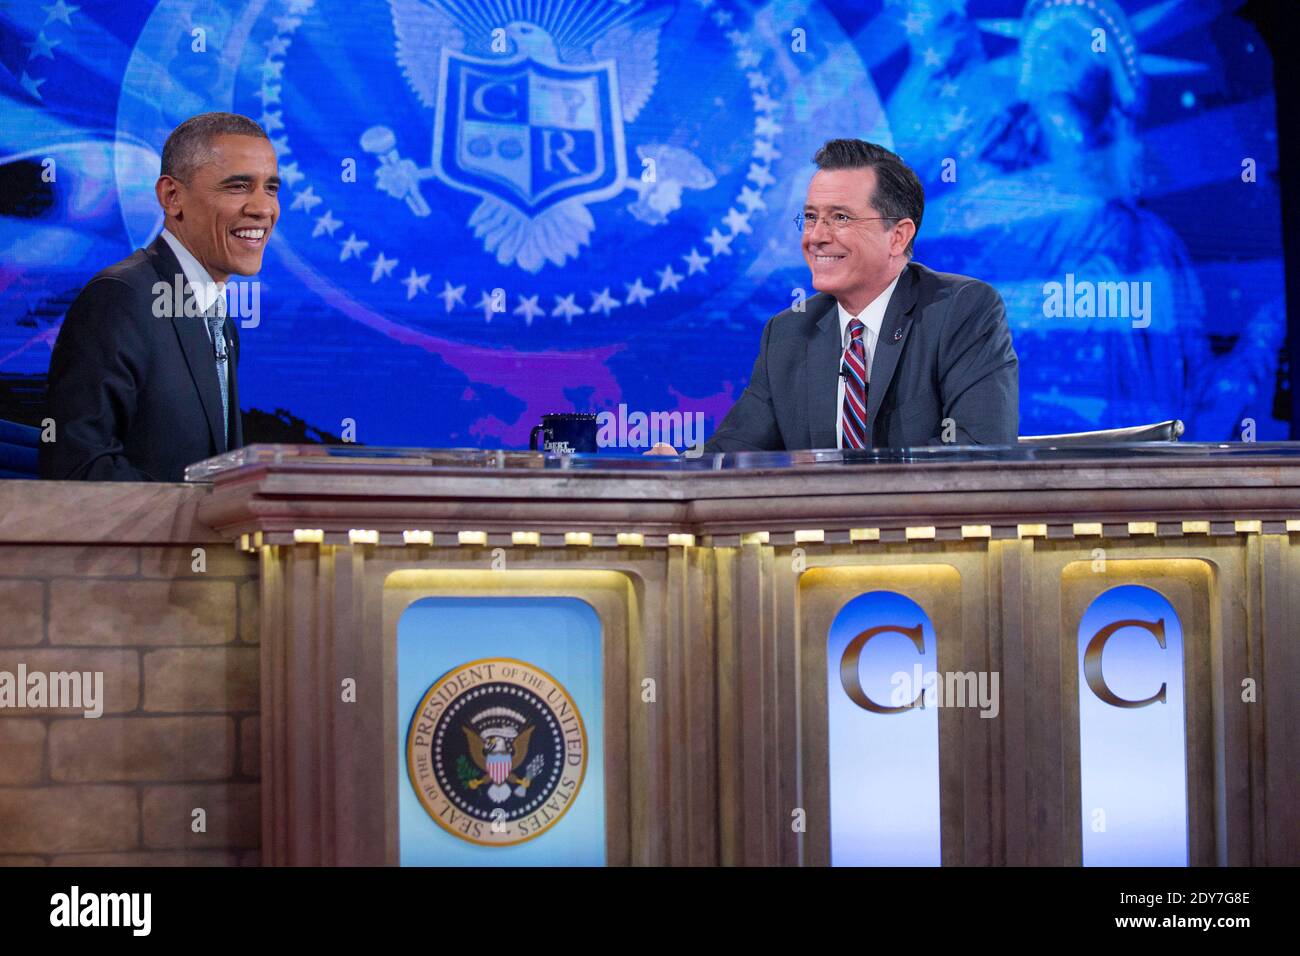 U.S. President Barack Obama, left, tapes Comedy Centrals The Colbert Report with television personality Stephen Colbert in Lisner Auditorium at George Washington University in Washington, DC, USA, on Monday, December 8, 2014. This is President Obamas third appearance on The Colbert Report that will broadcast its final show on December 18. Photo by Andrew Harrer/Pool/ABACAPRESS.COM Stock Photo